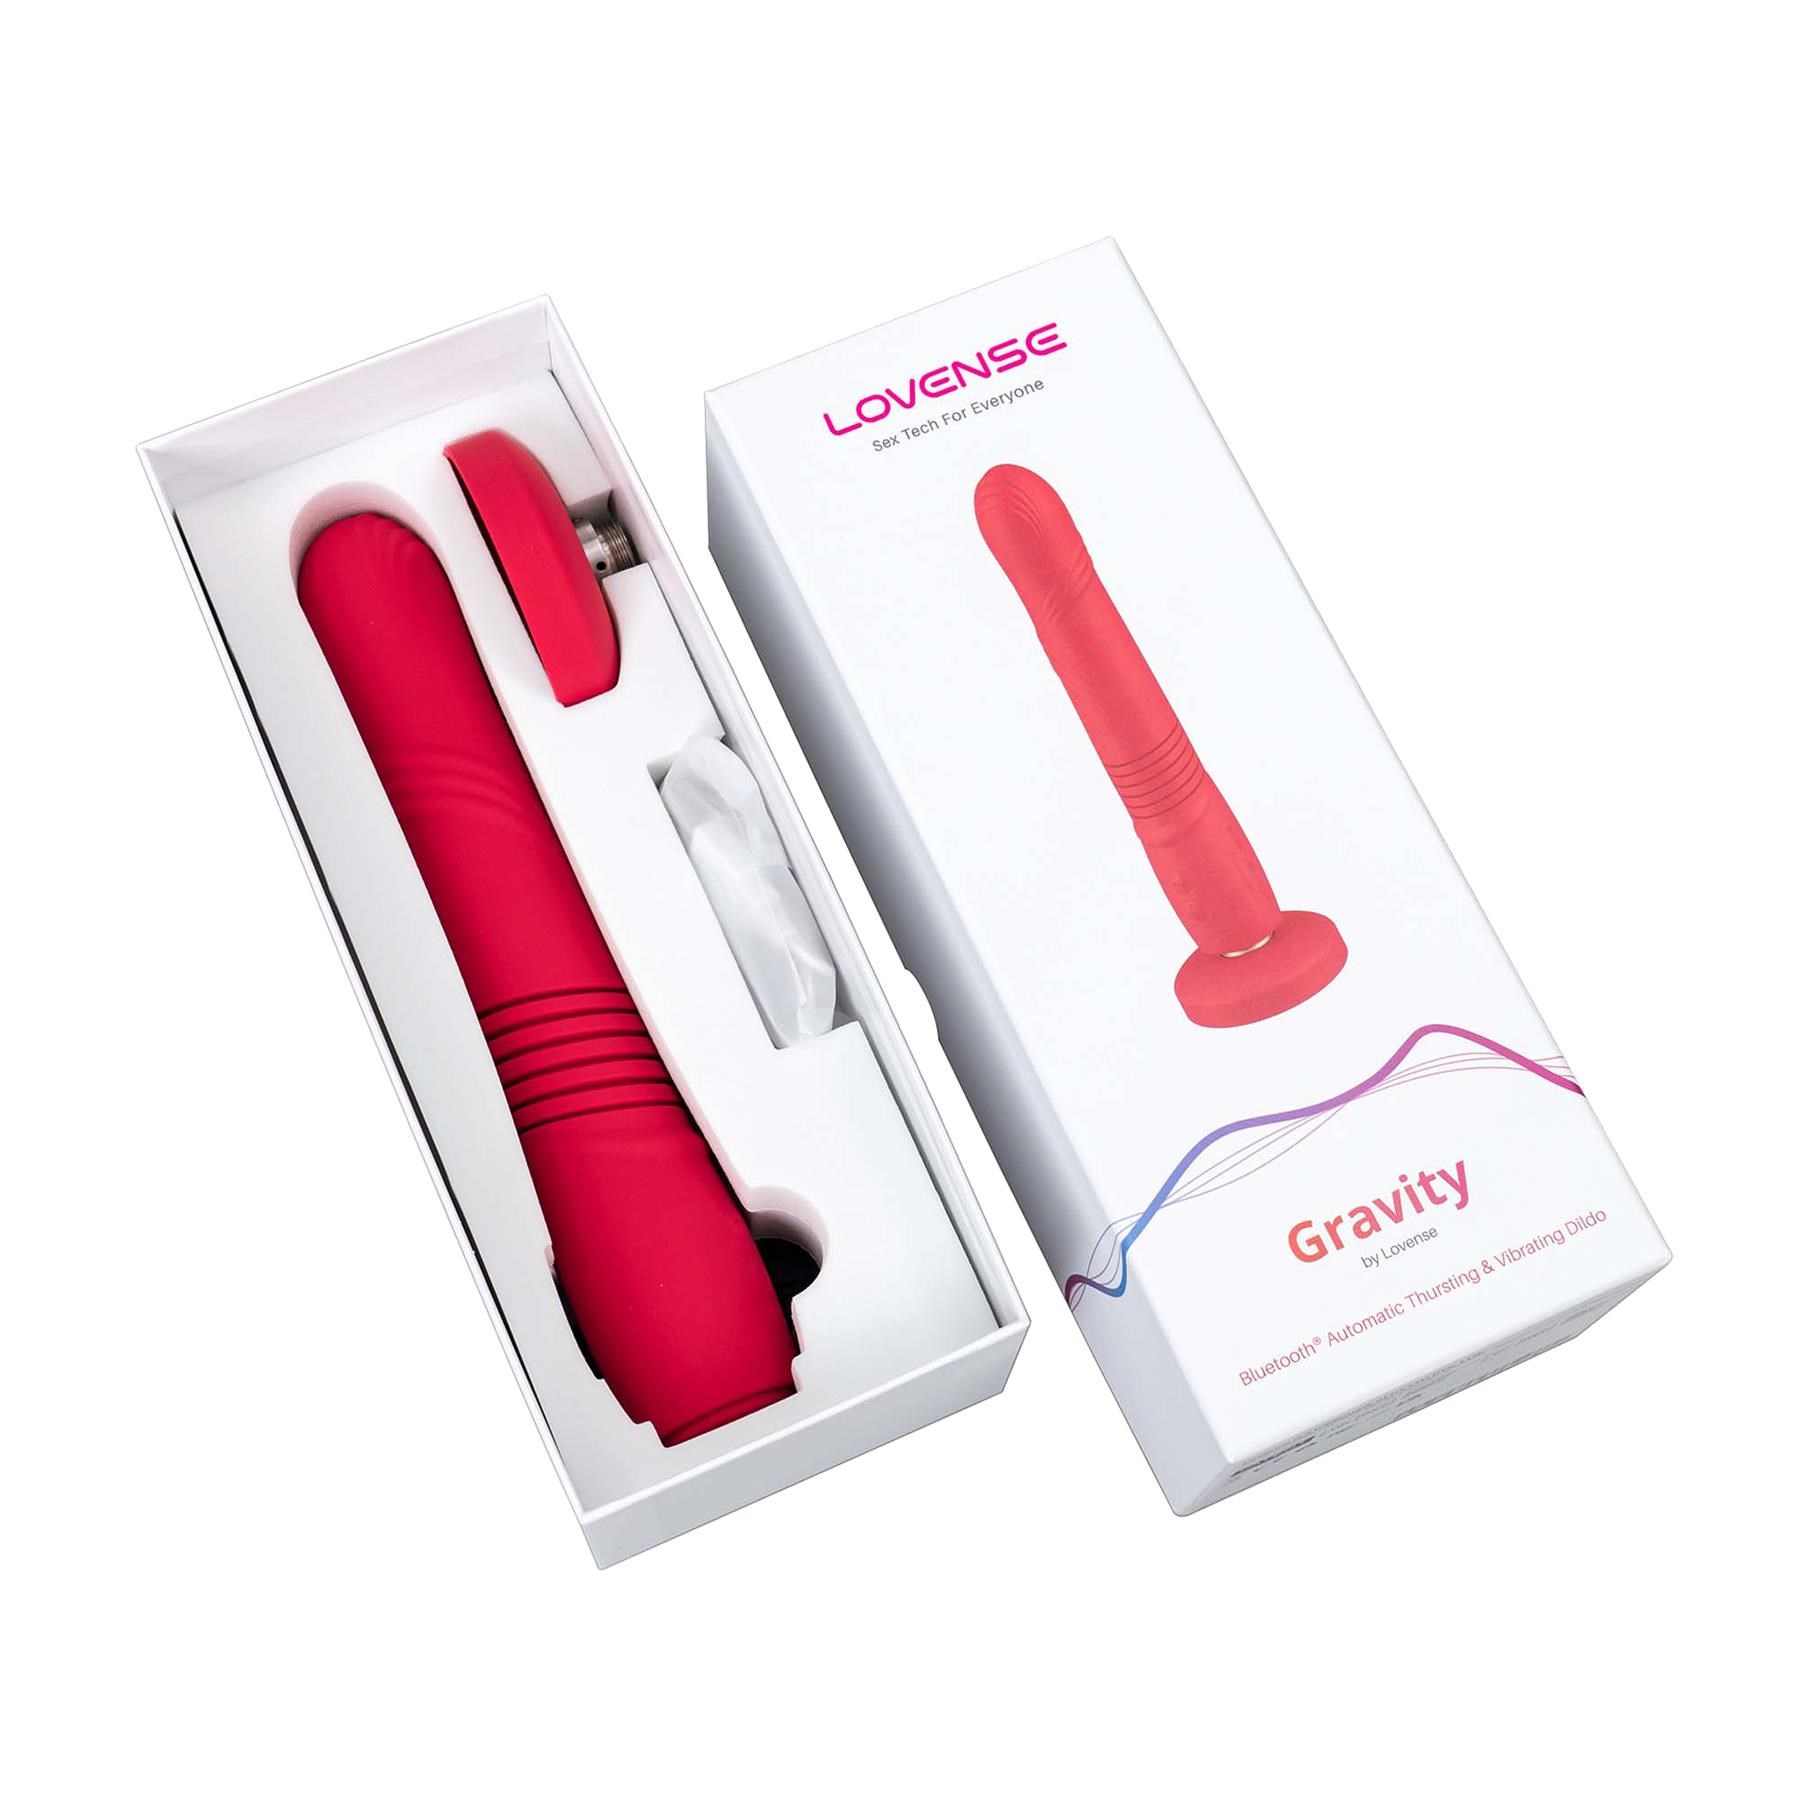 Lovense Gravity Bluetooth Thruster - Product in Open Box